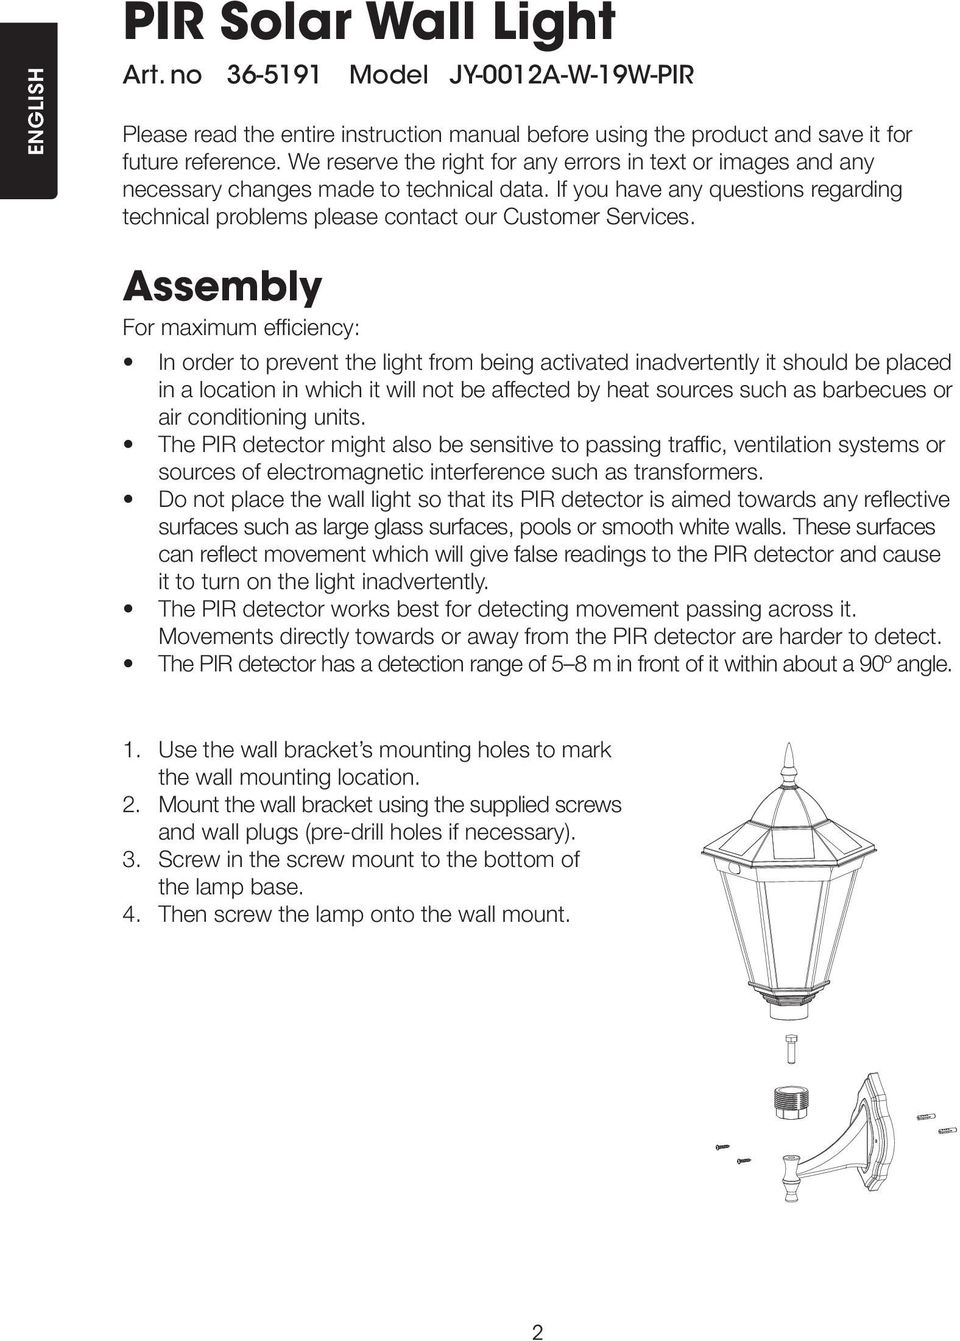 Assembly For maximum efficiency: In order to prevent the light from being activated inadvertently it should be placed in a location in which it will not be affected by heat sources such as barbecues